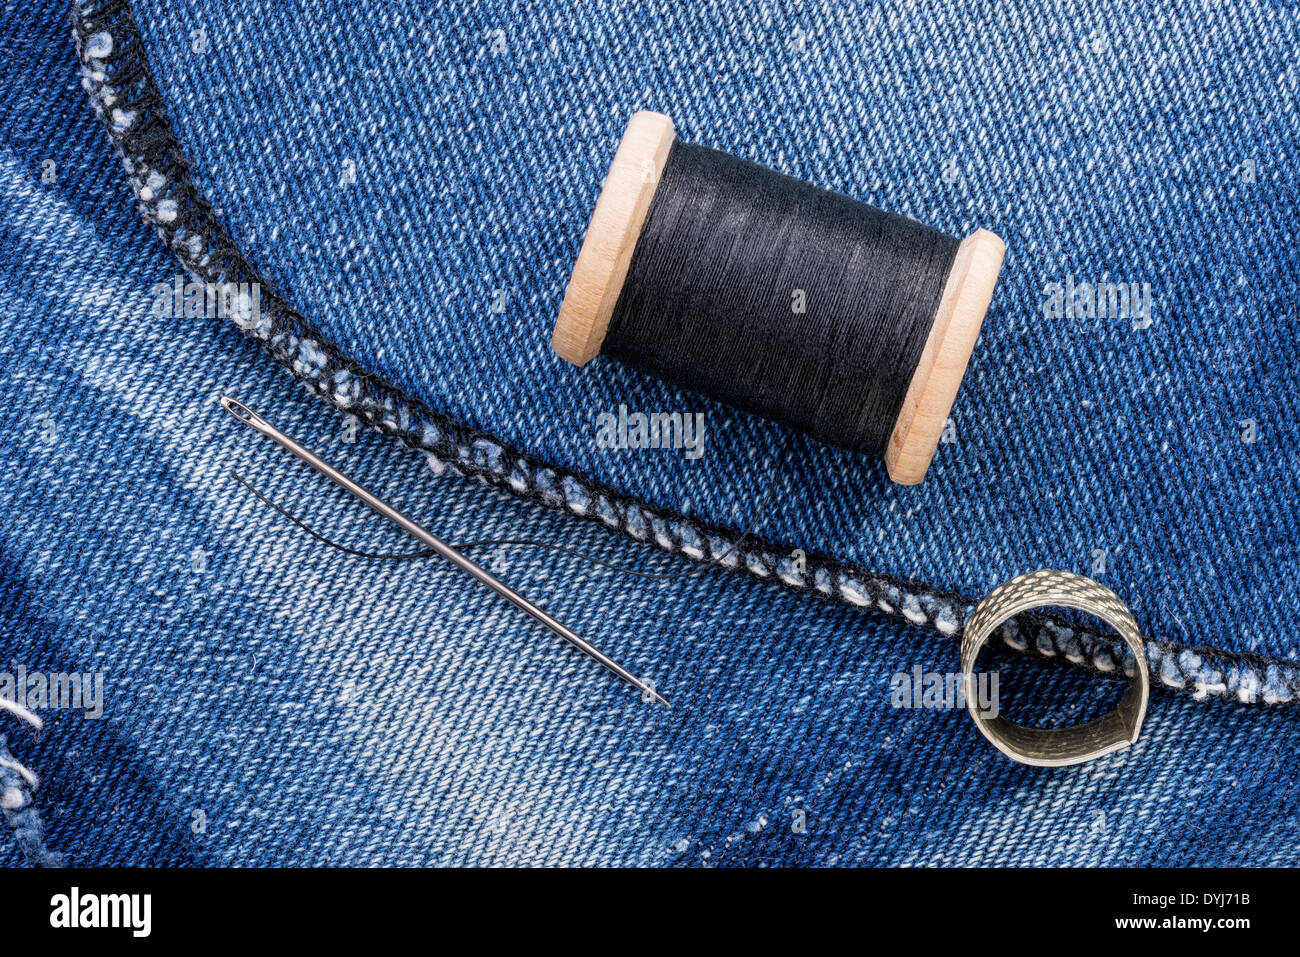 A roll of black thread and a needle on a piece of blue jeans denim